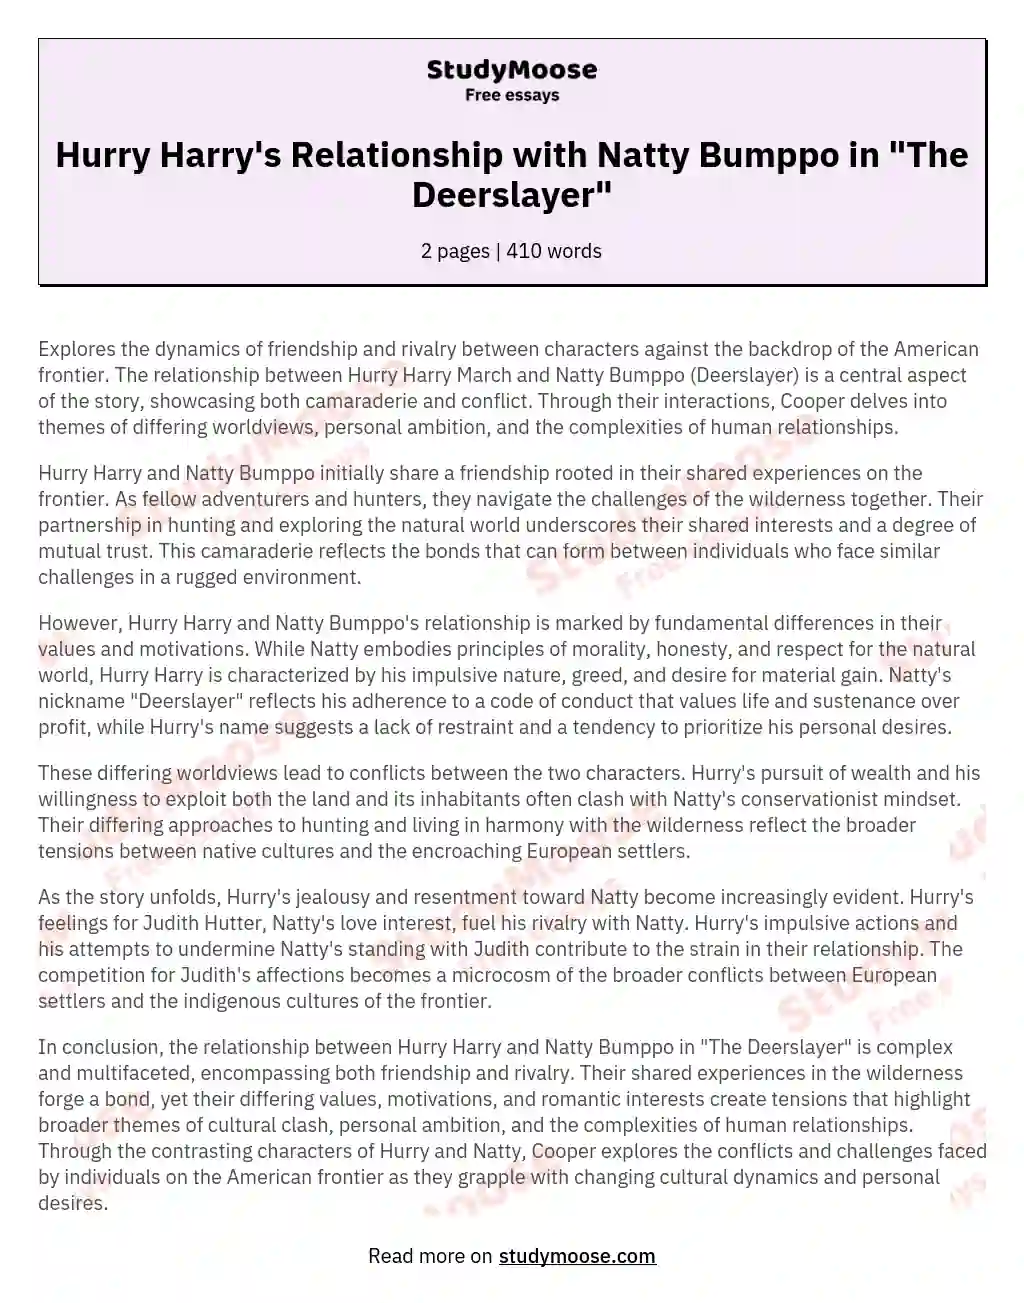 Hurry Harry's Relationship with Natty Bumppo in "The Deerslayer" essay